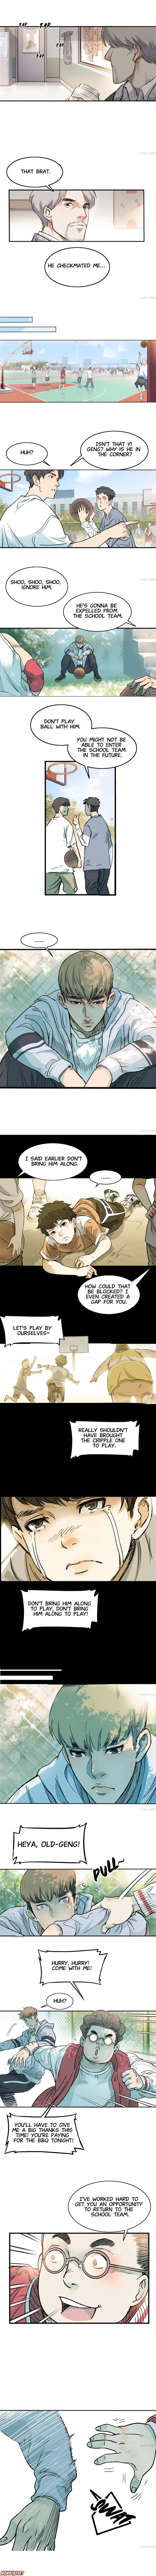 Streetball in the Hood Chapter 4 - Page 2